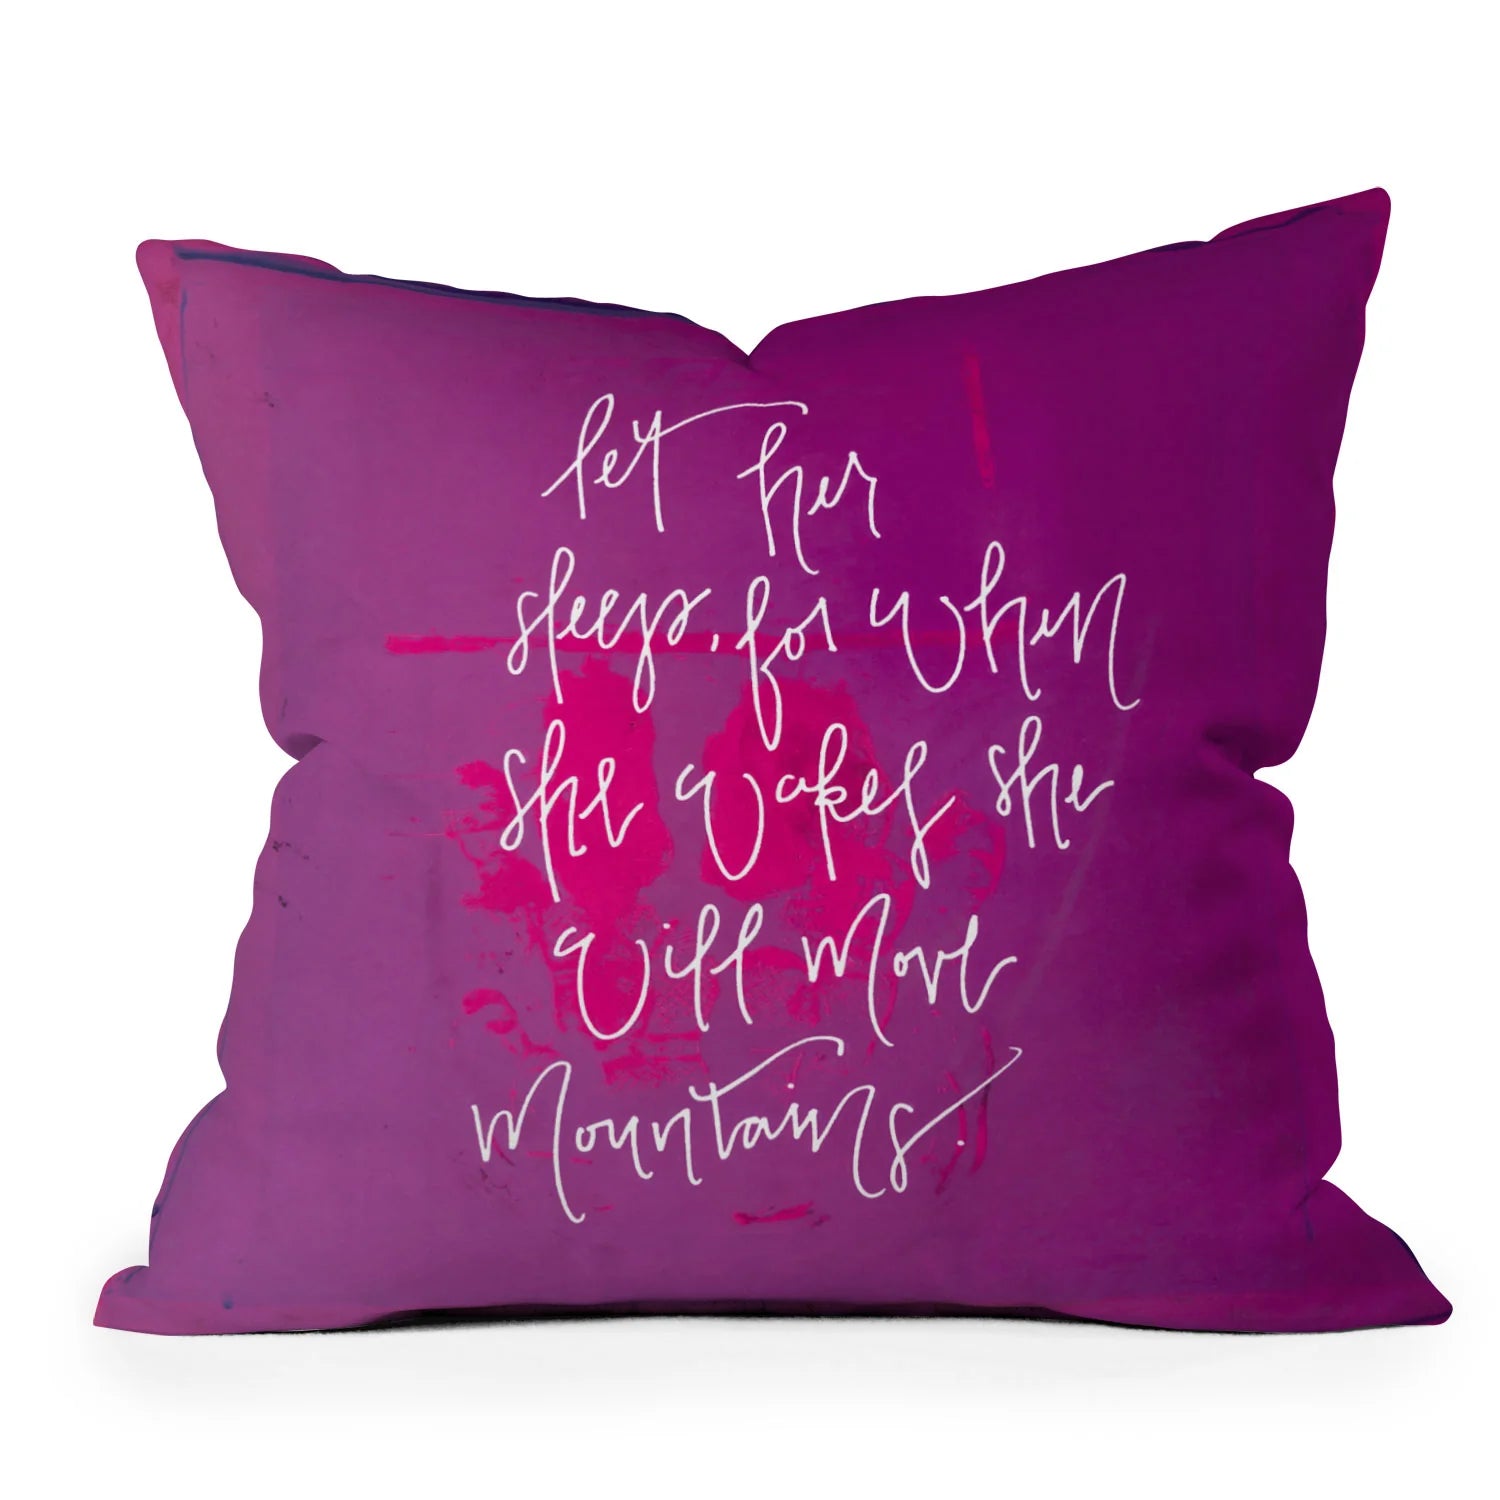 "she will move mountains" throw pillow